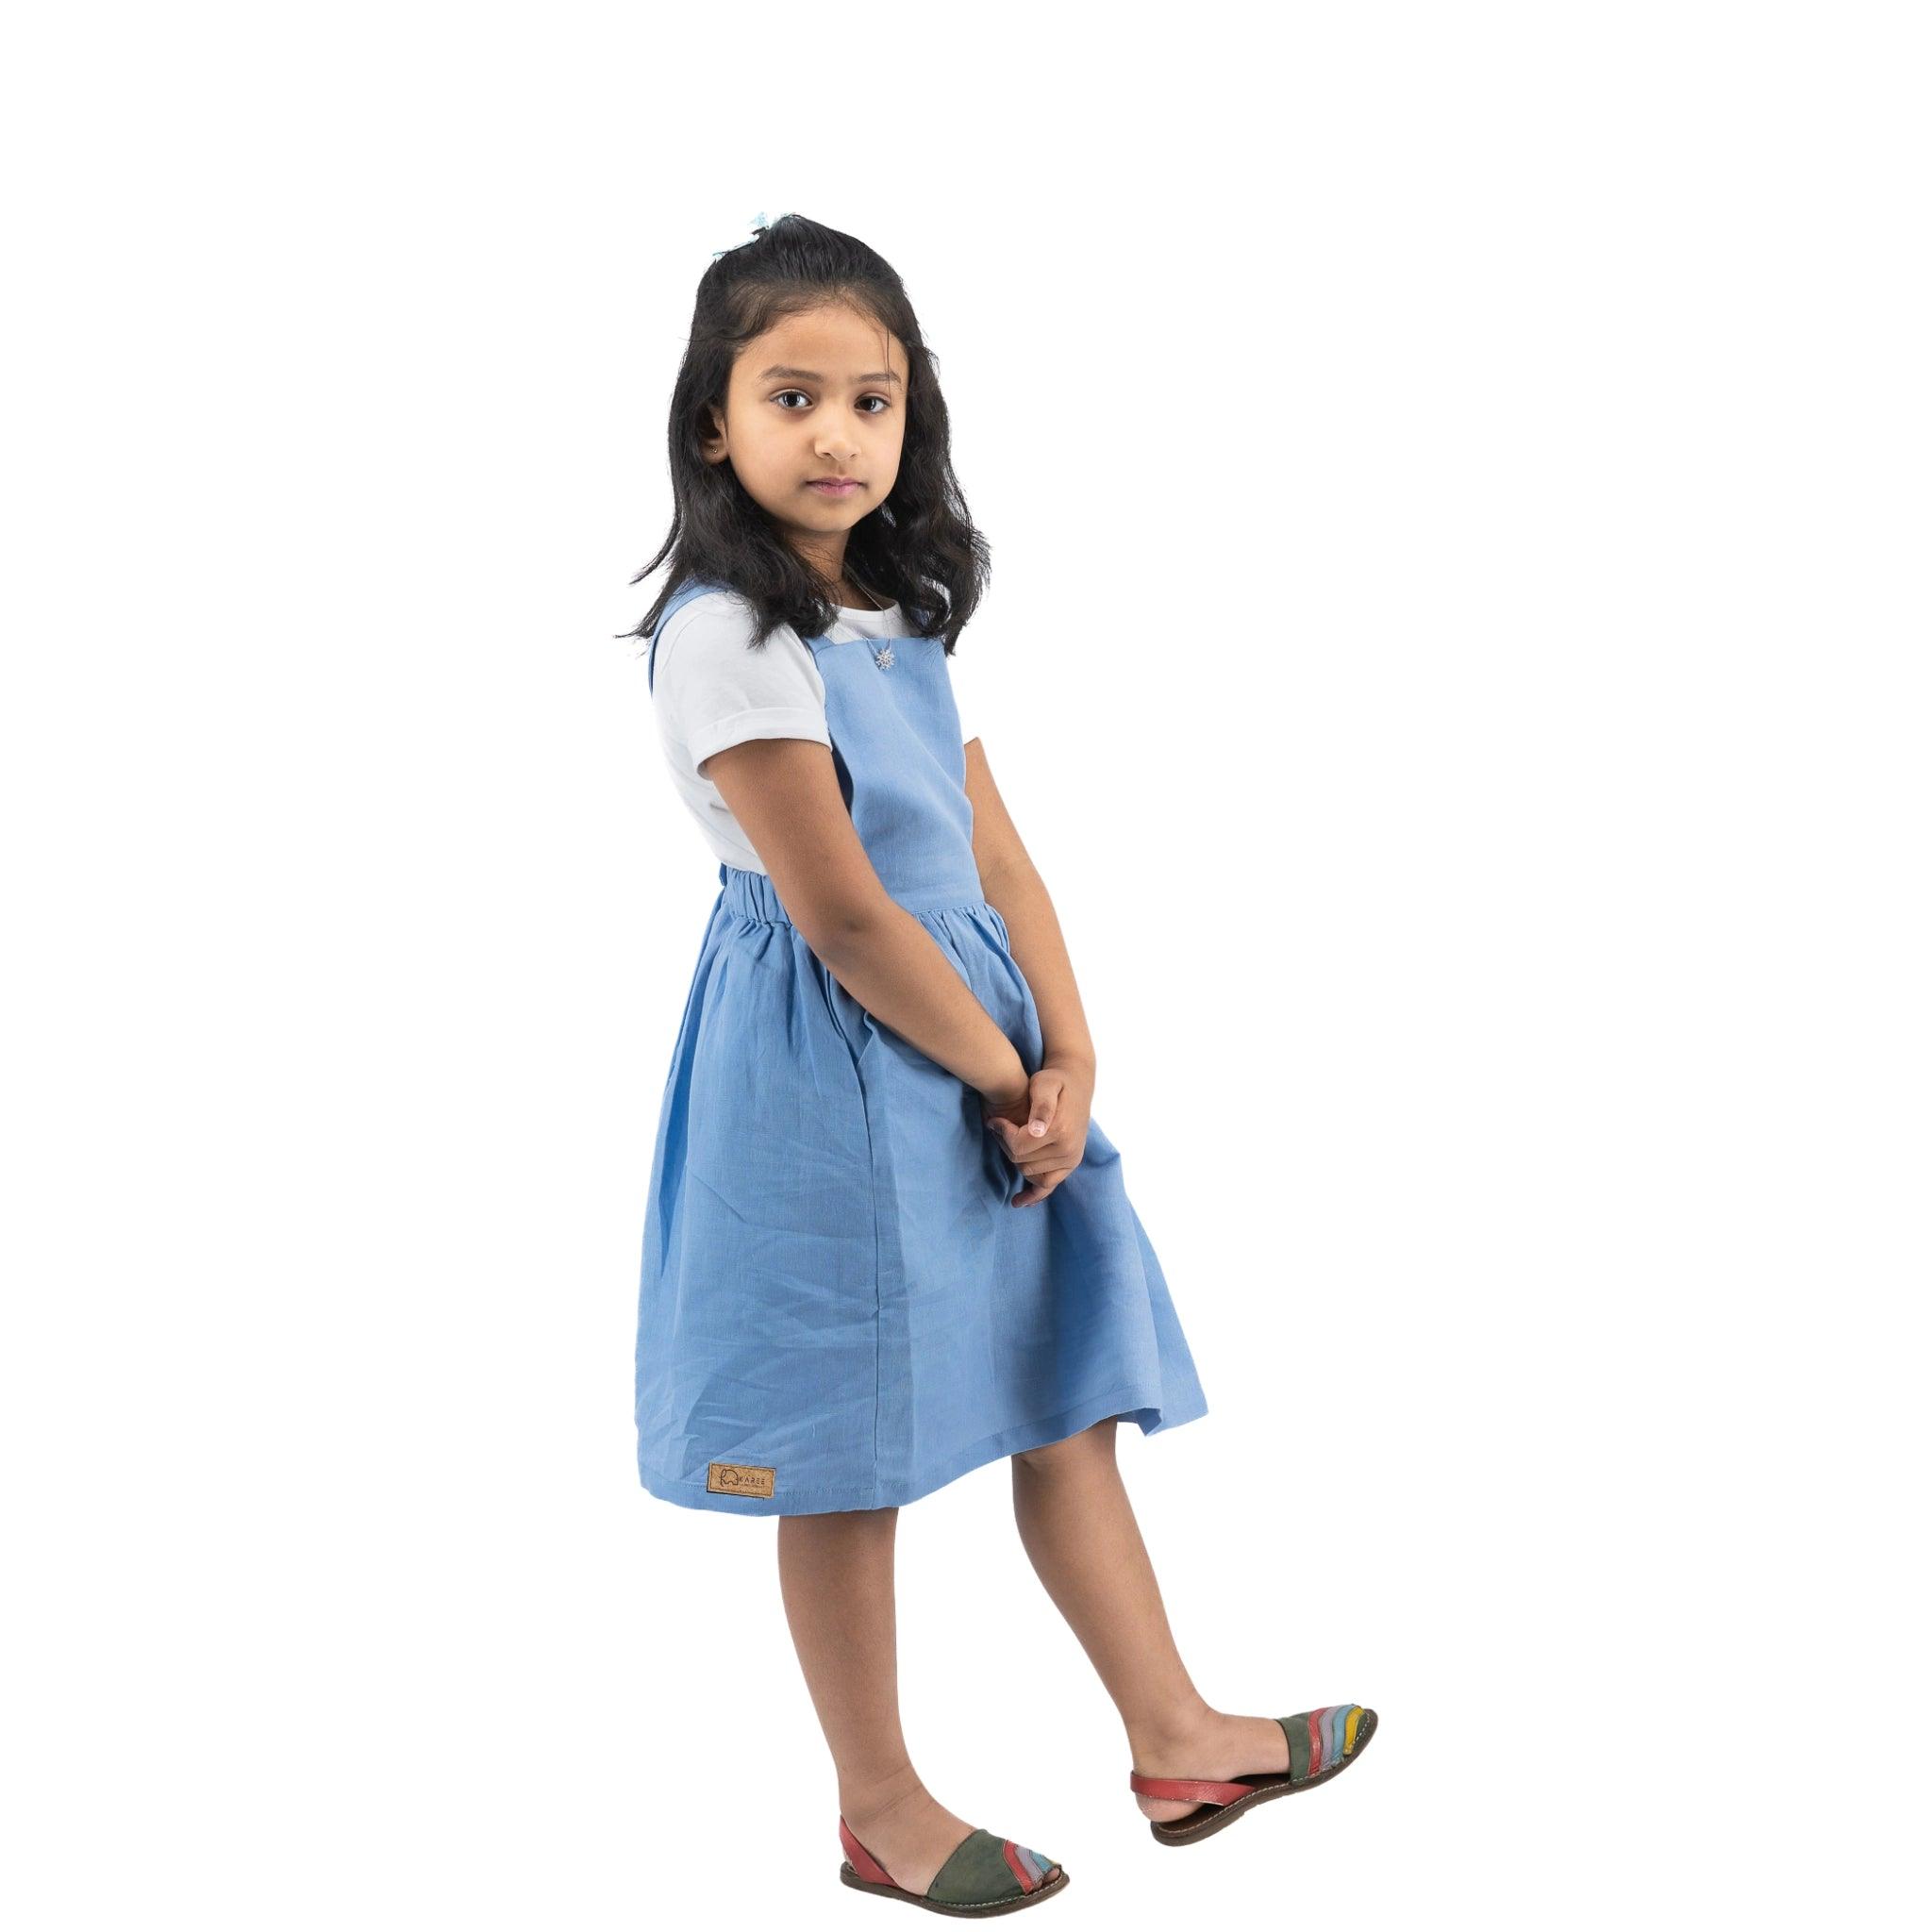 Young girl in a Karee cerulean blue linen pinafore and colorful shoes standing sideways and looking at the camera, isolated on a white background.